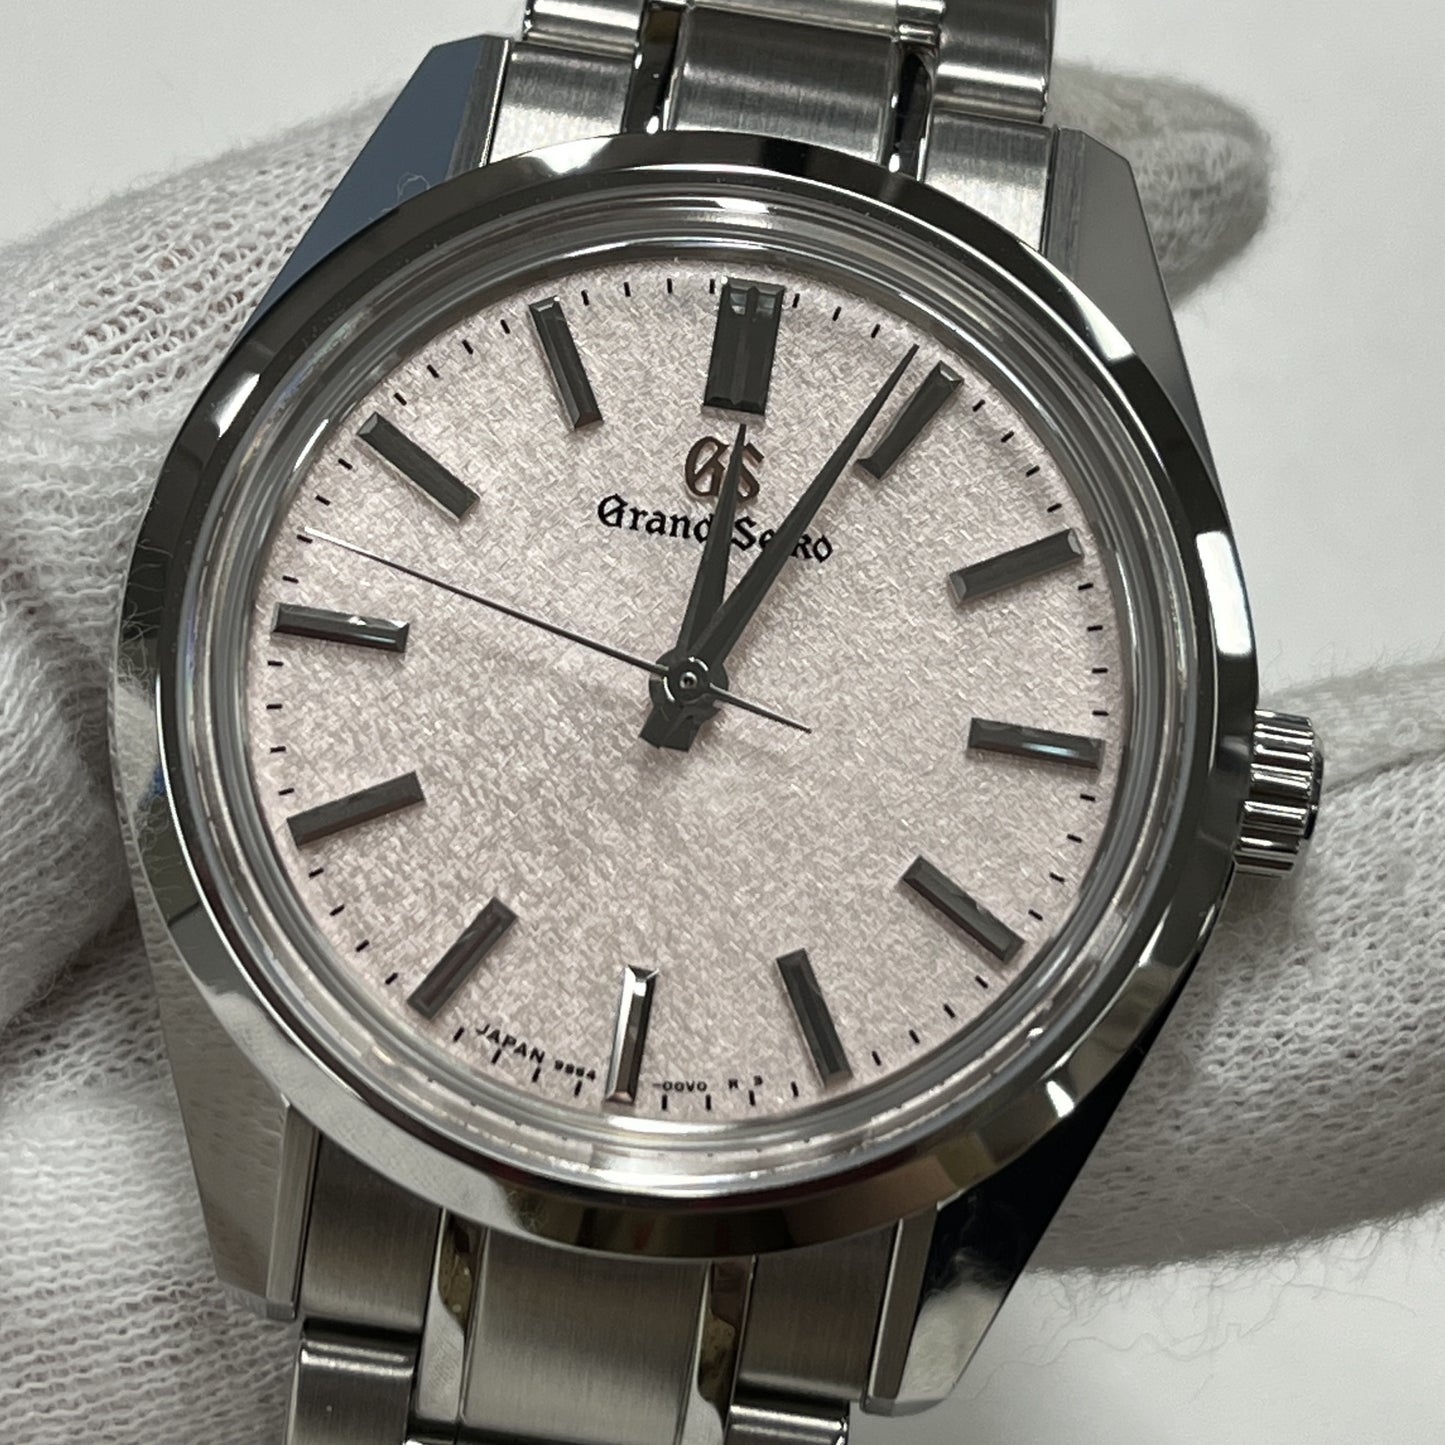 SBGW289 Heritage Collection 44GS 55th Anniversary Limited Edition 2GSE01-00066